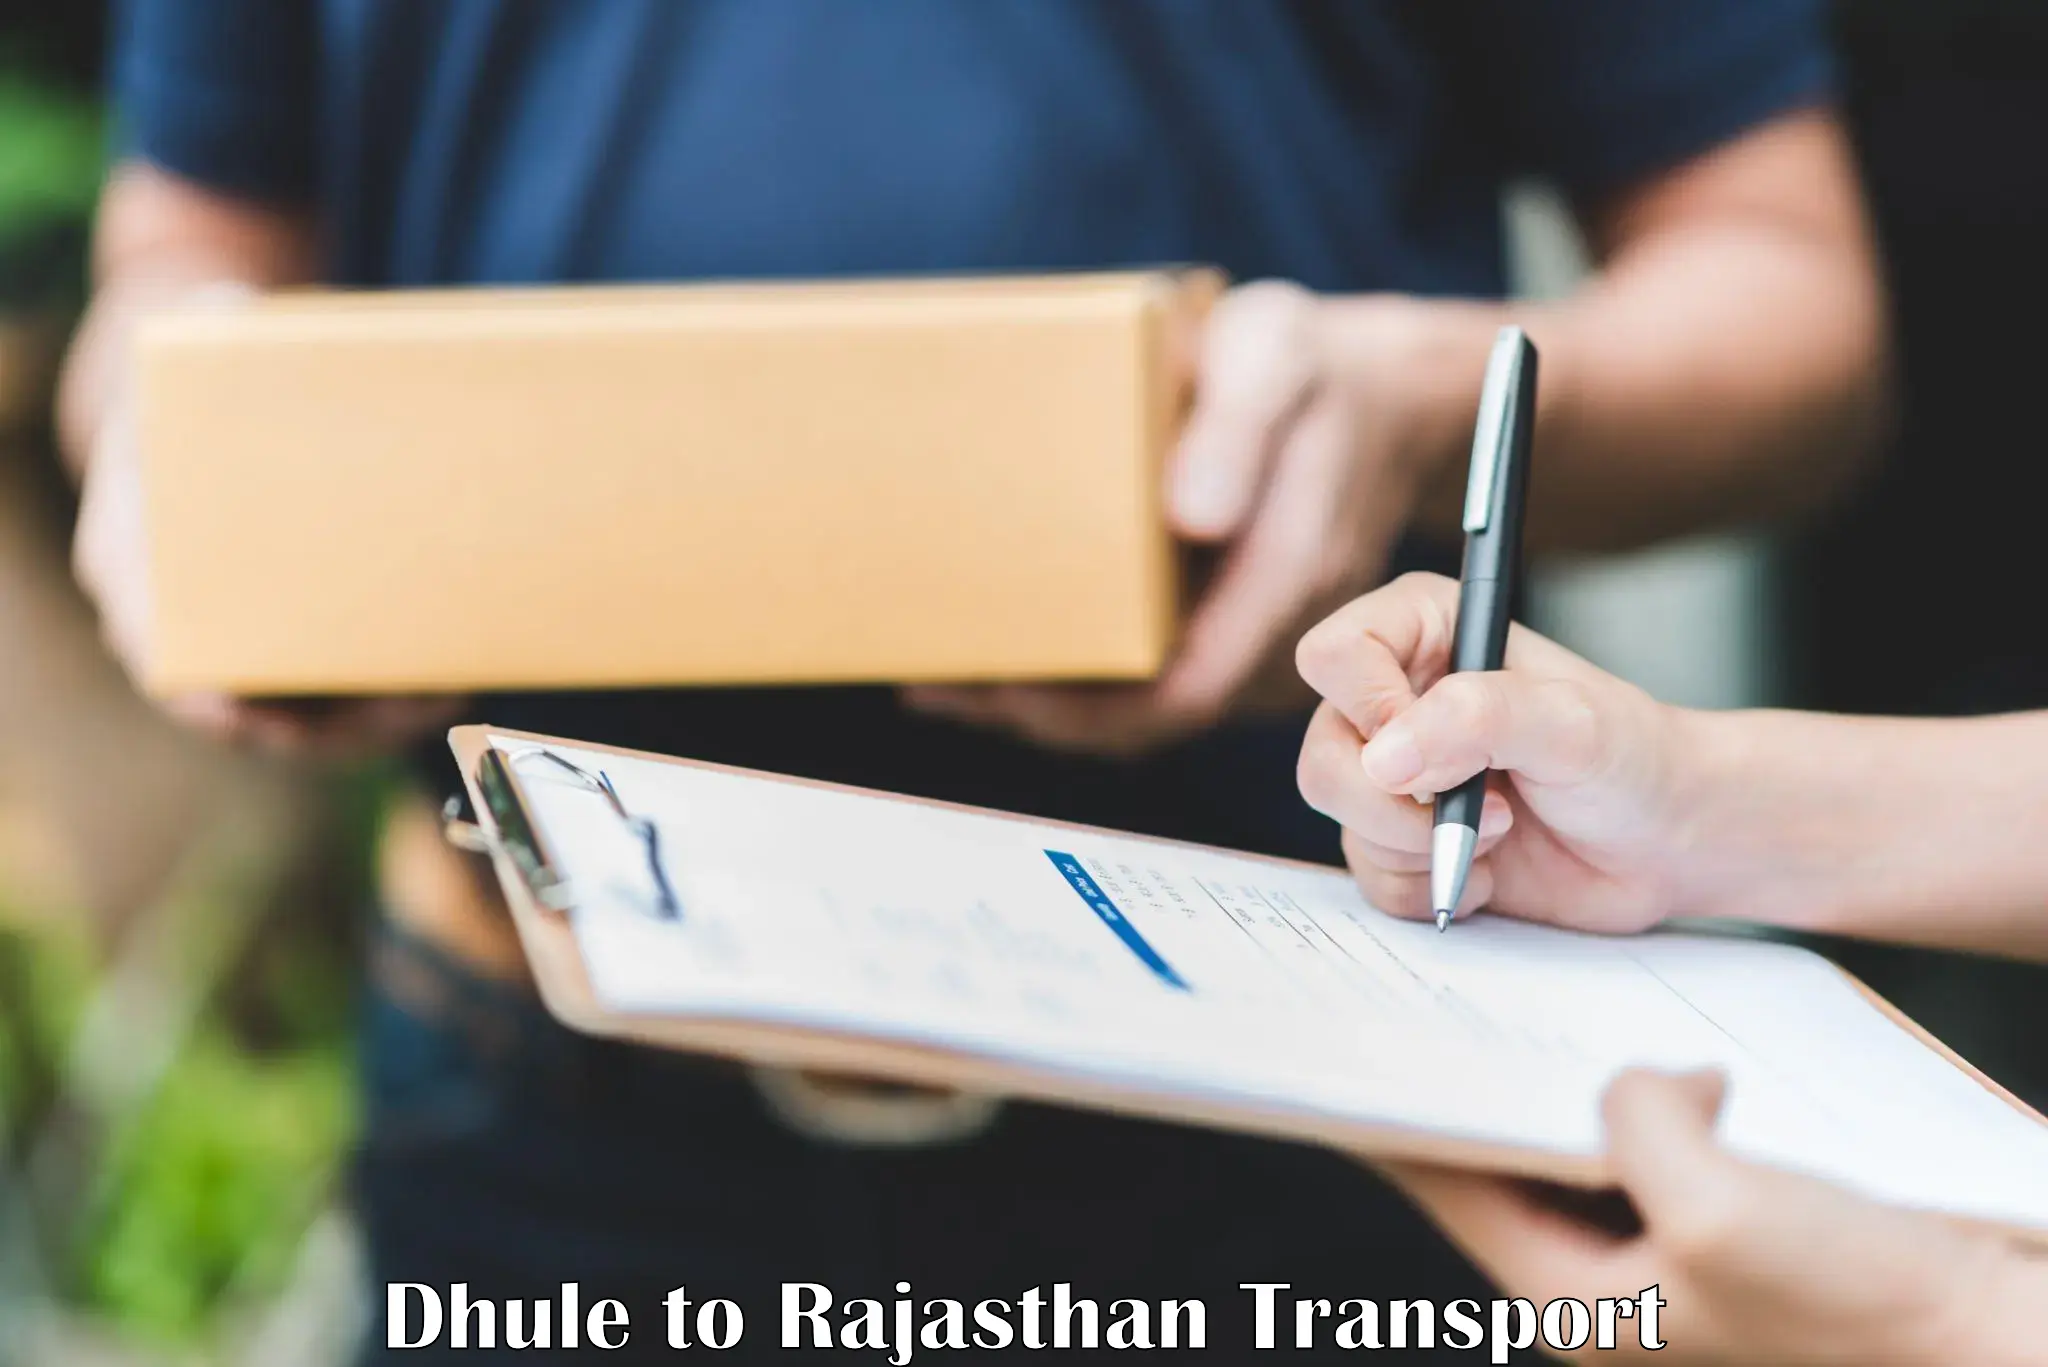 Online transport service Dhule to Didwana